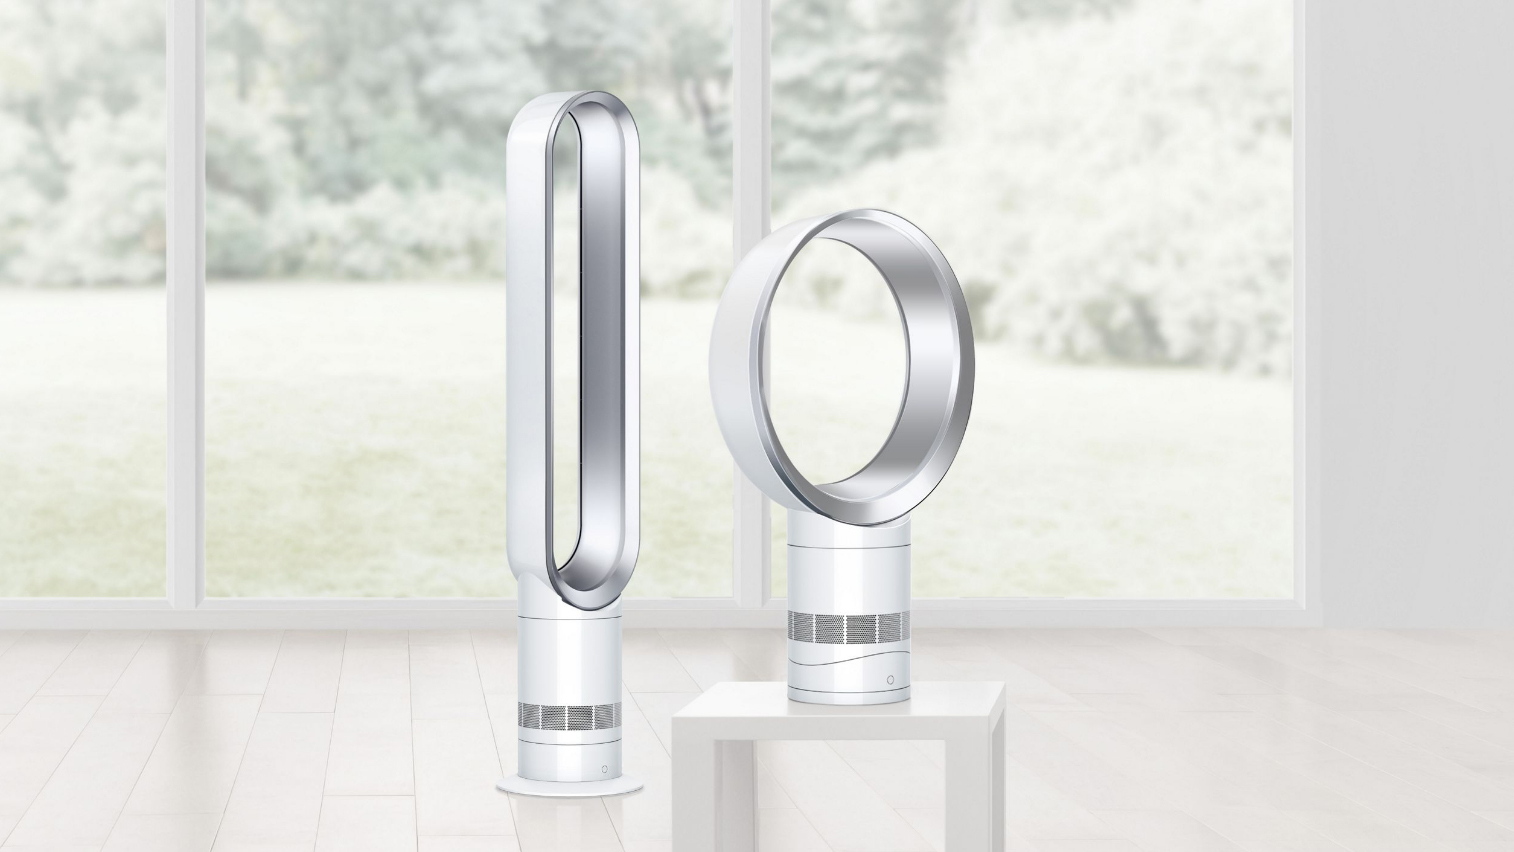 The Best Dyson Fan For Cooling Heating And Purifying 2019 regarding measurements 1514 X 852